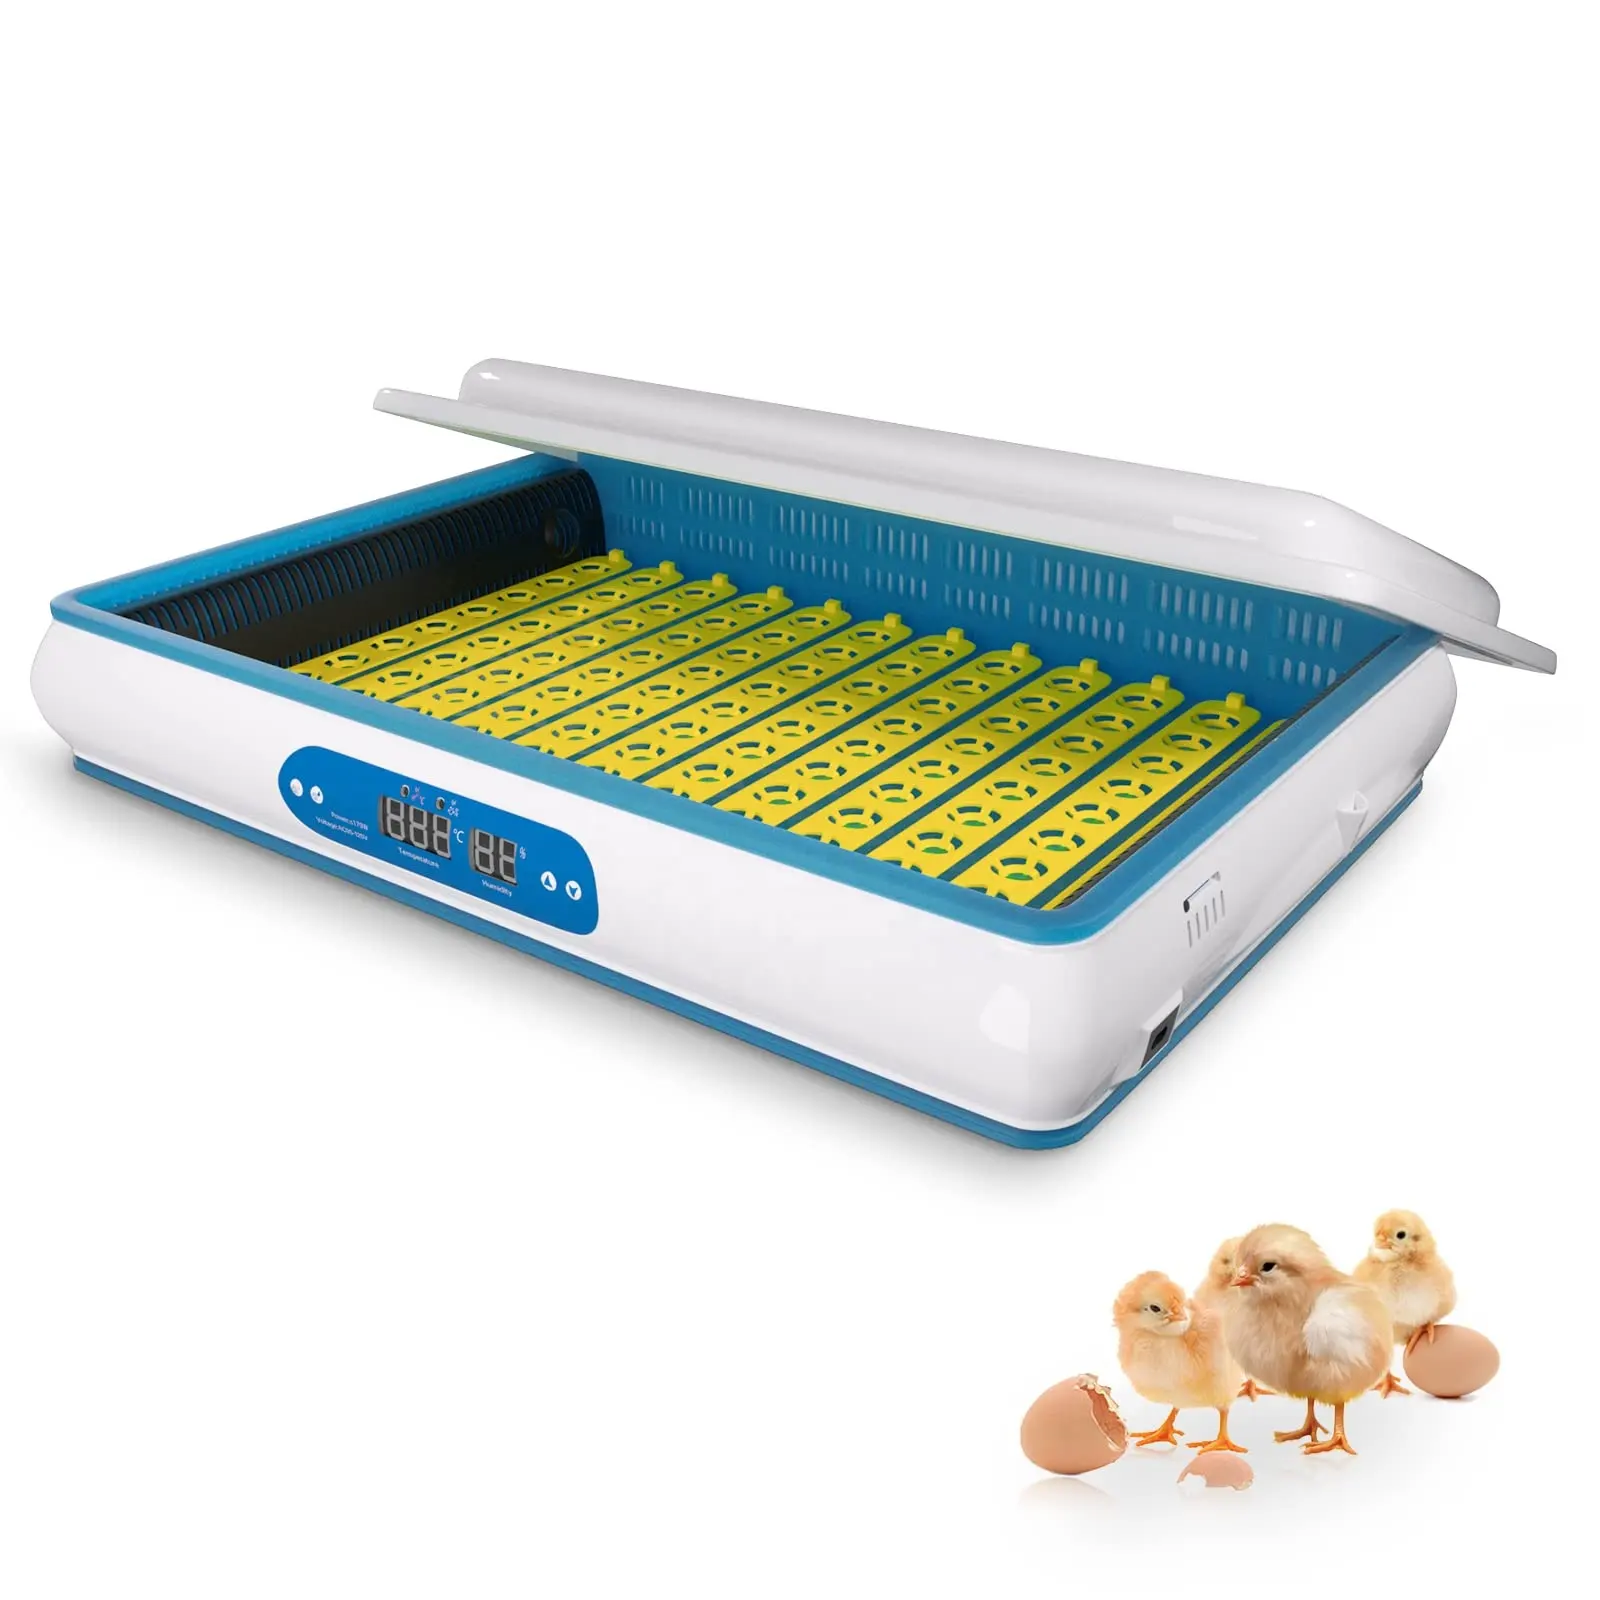 HHD Top Selling 120 egg incubator fully automatic incubator machine for chicken eggs